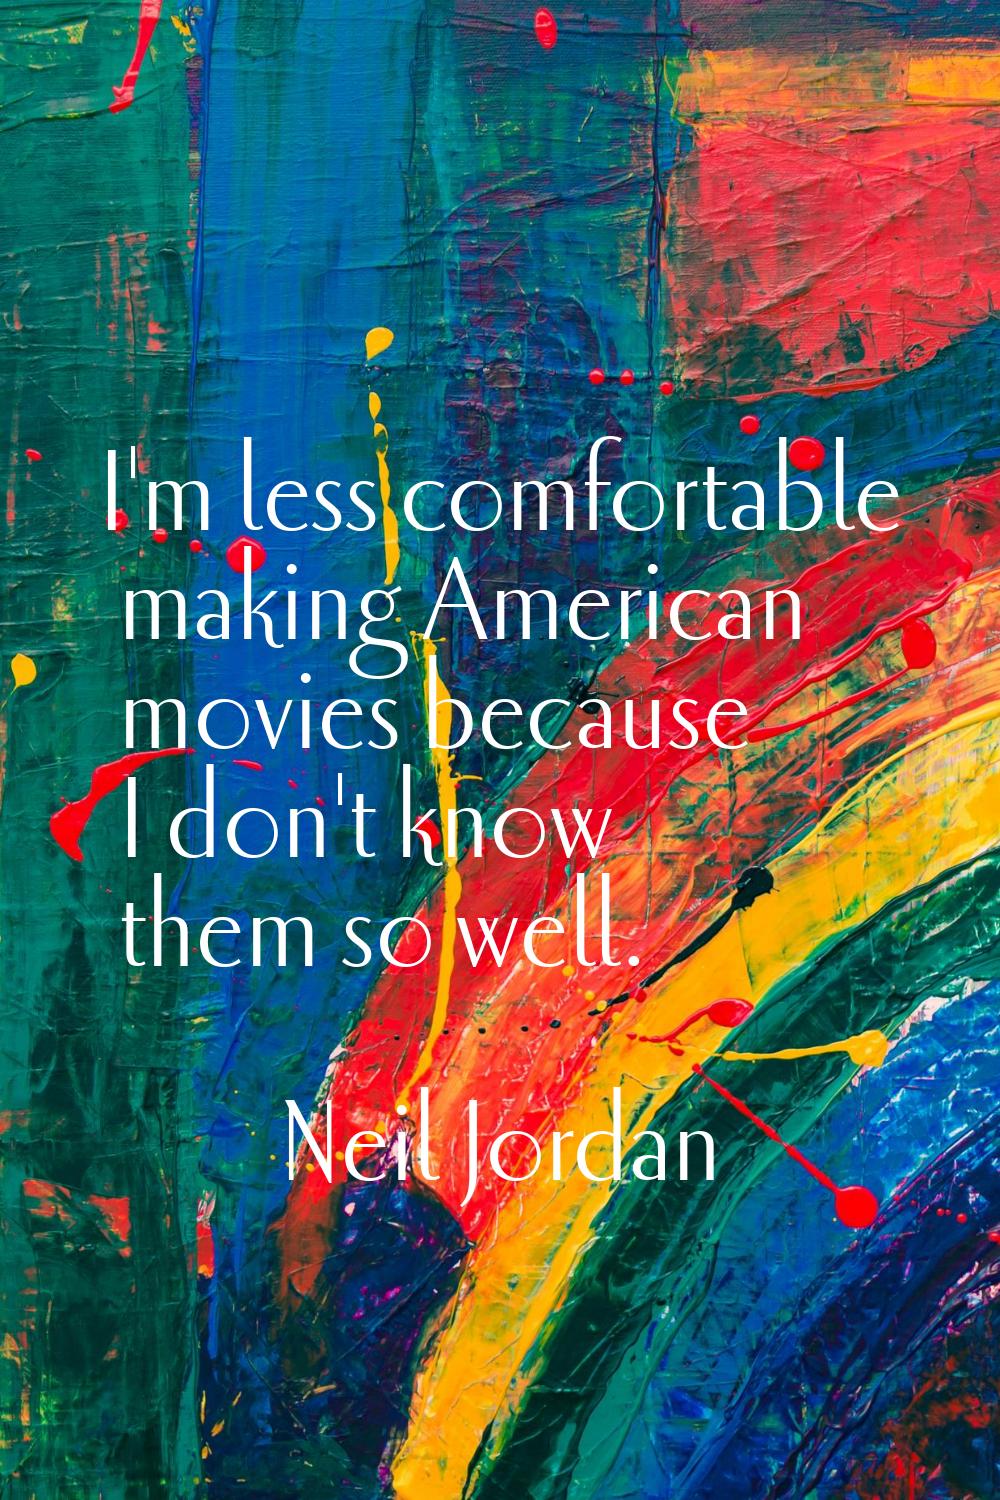 I'm less comfortable making American movies because I don't know them so well.